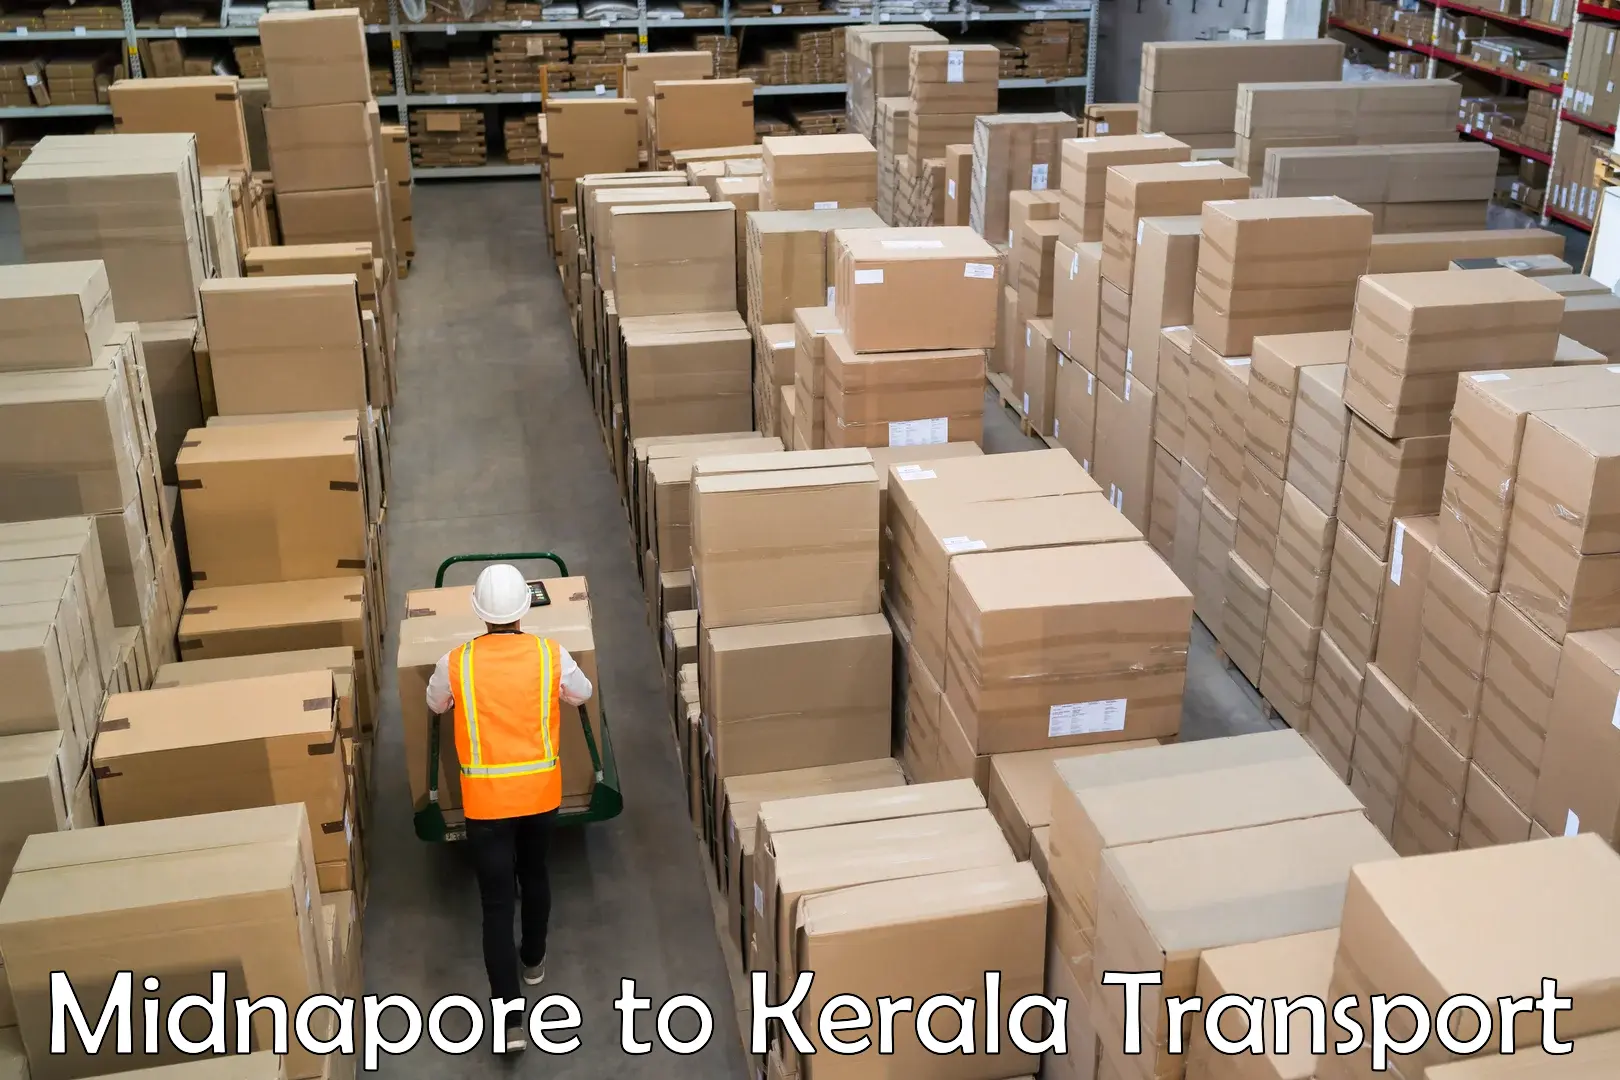 Vehicle transport services in Midnapore to Kerala